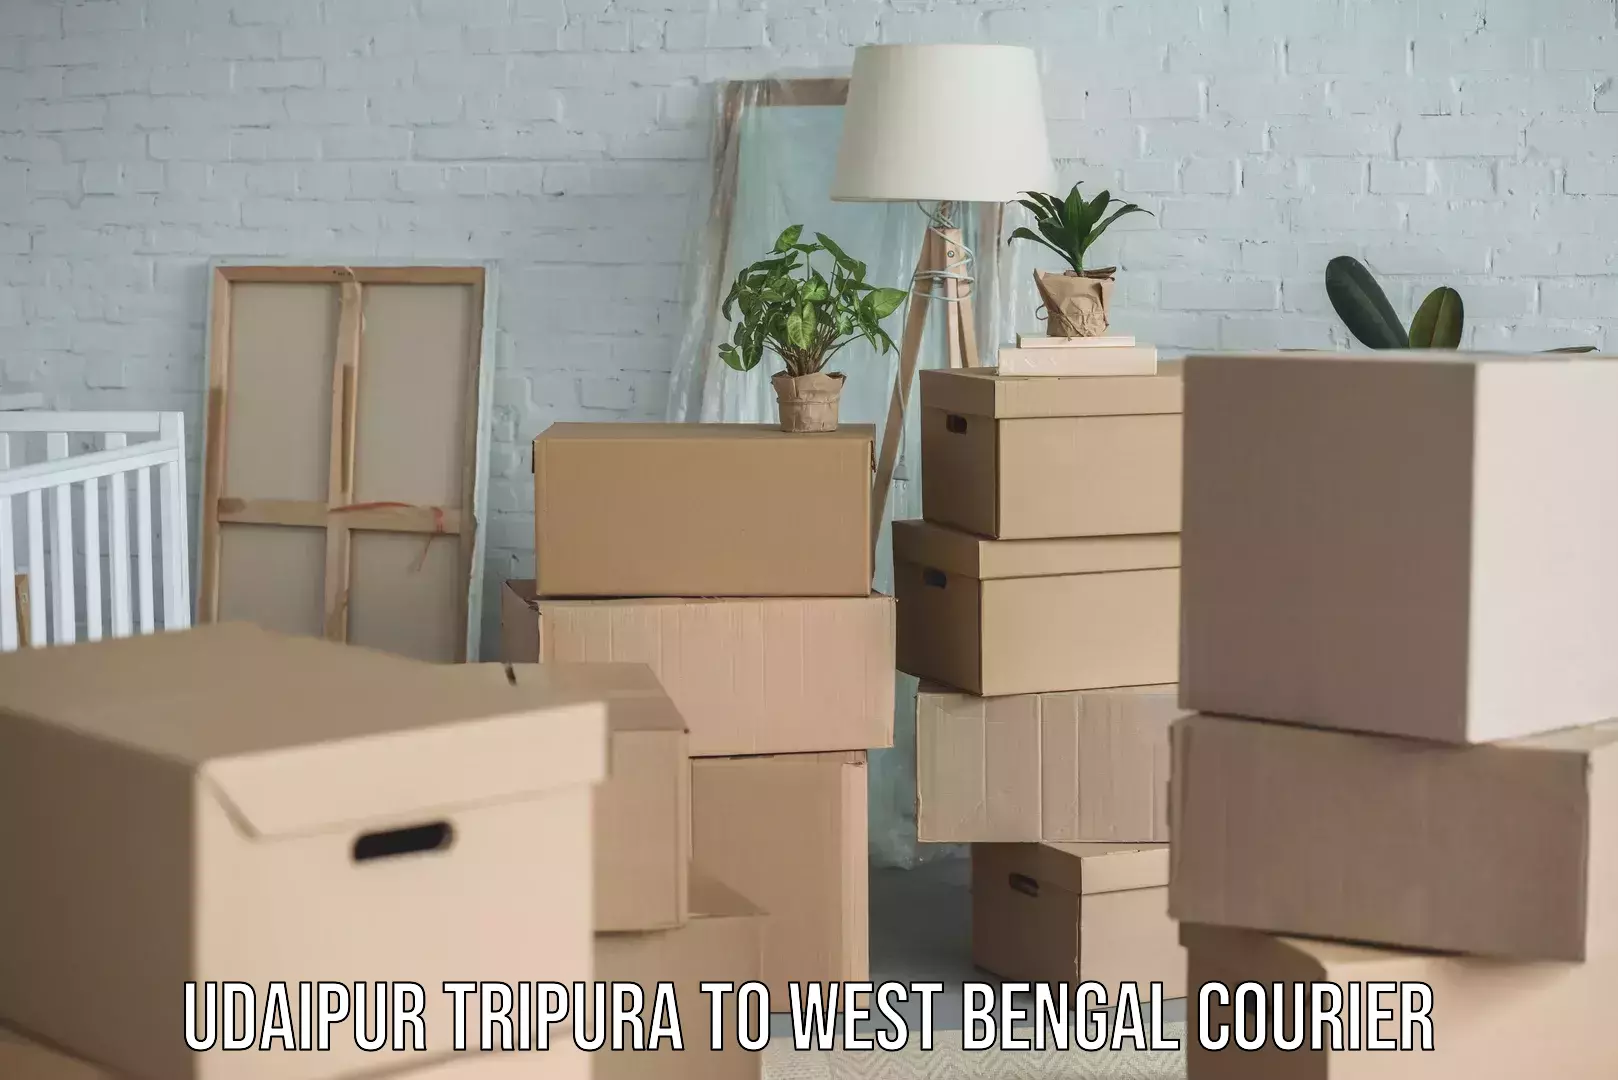 Advanced shipping network Udaipur Tripura to West Bengal